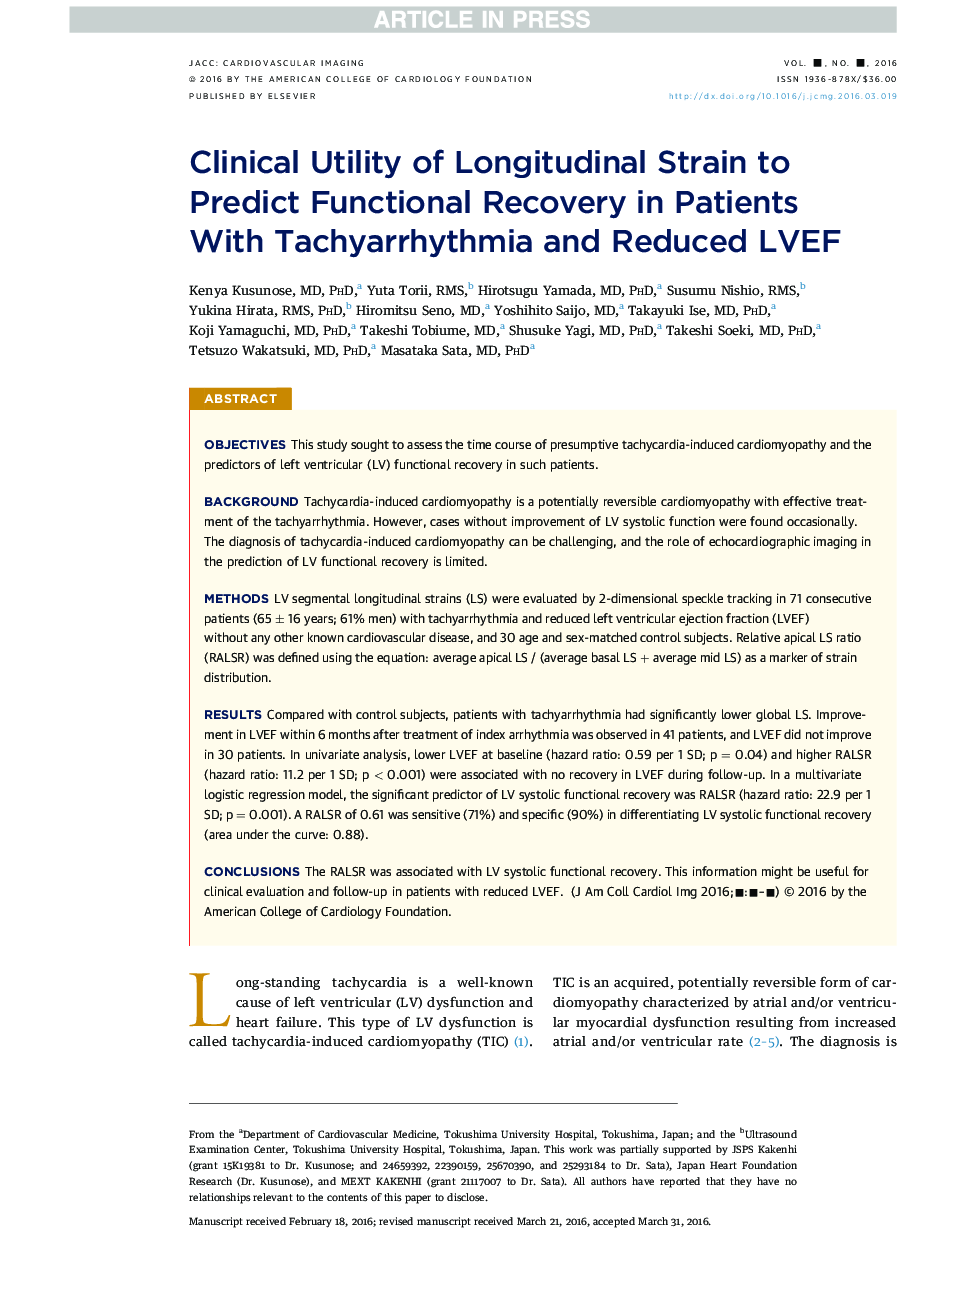 Clinical Utility of Longitudinal Strain to Predict Functional Recovery in Patients WithÂ Tachyarrhythmia and Reduced LVEF